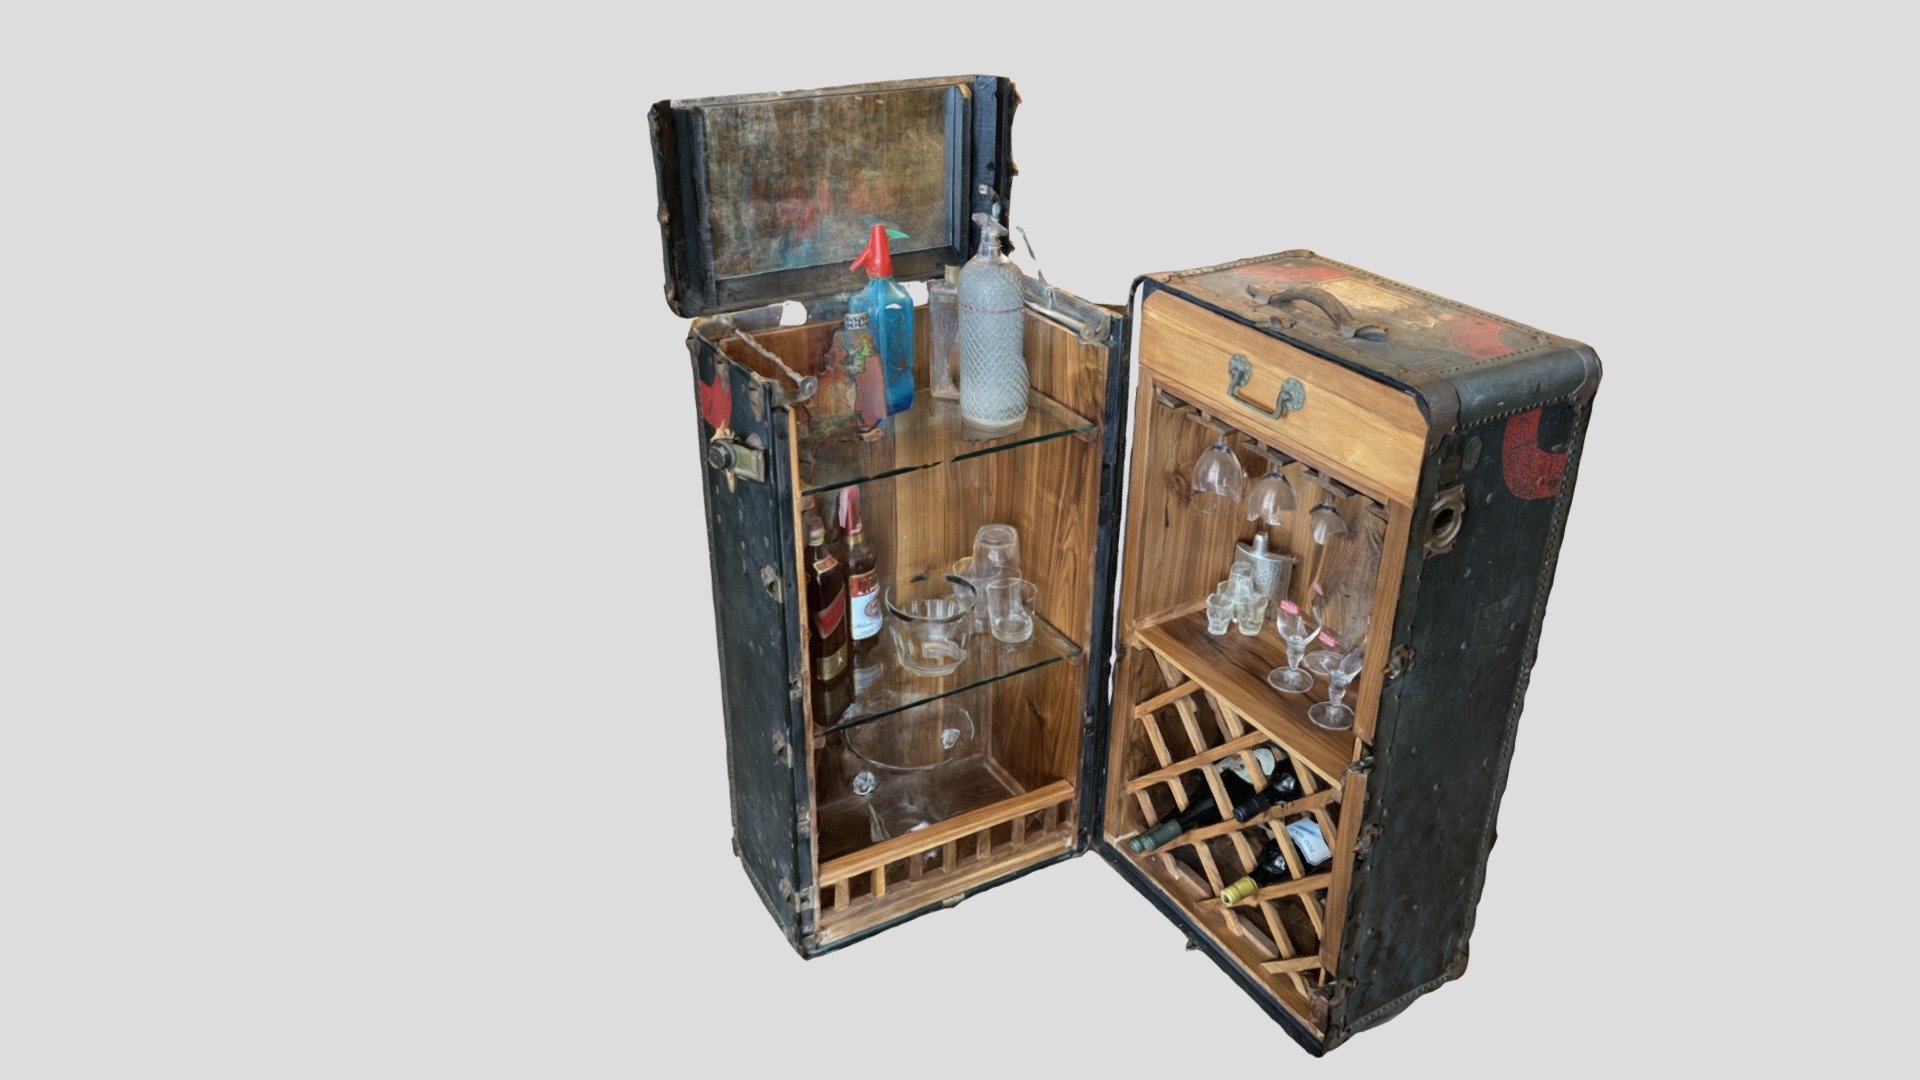 Re-Scape Inspired Recycling - Awesome old steamer trunk turned bar